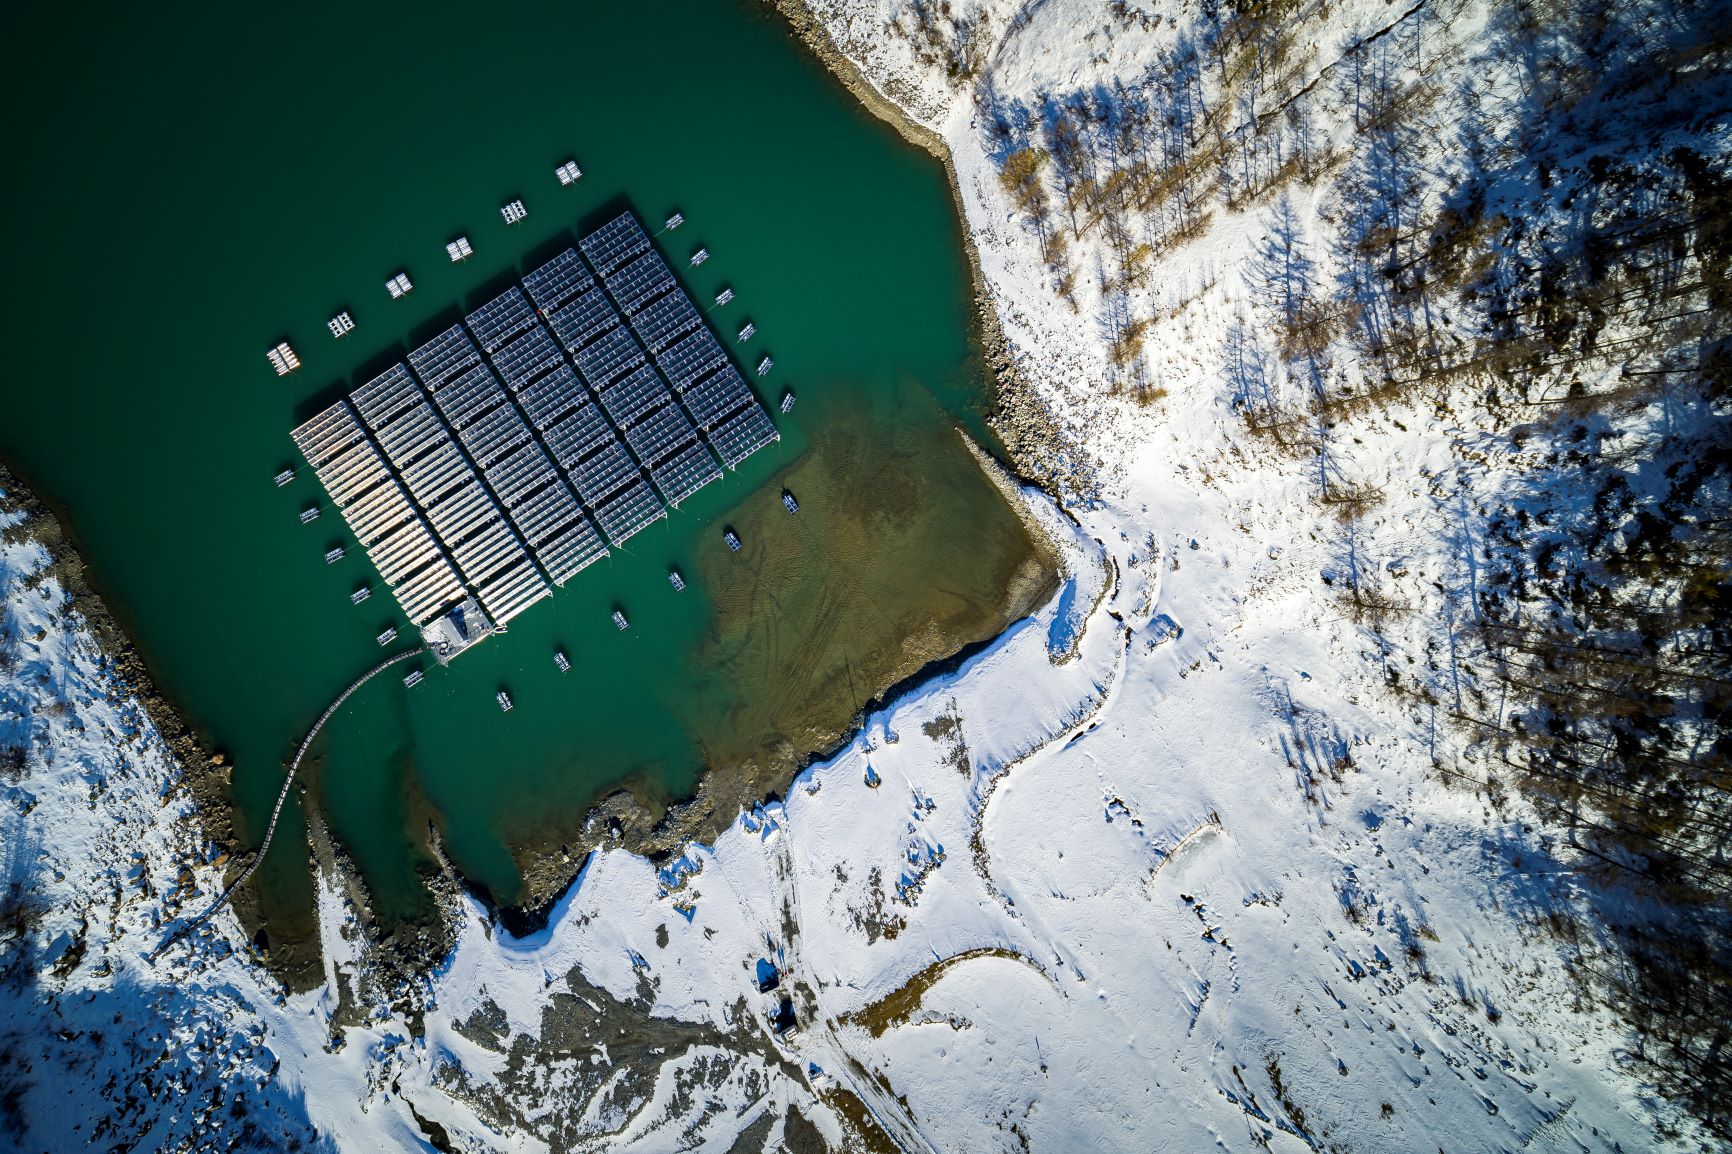 Lac des Toules is drained between November and March, leaving the solar plant resting directly on the ground © Romande Energie